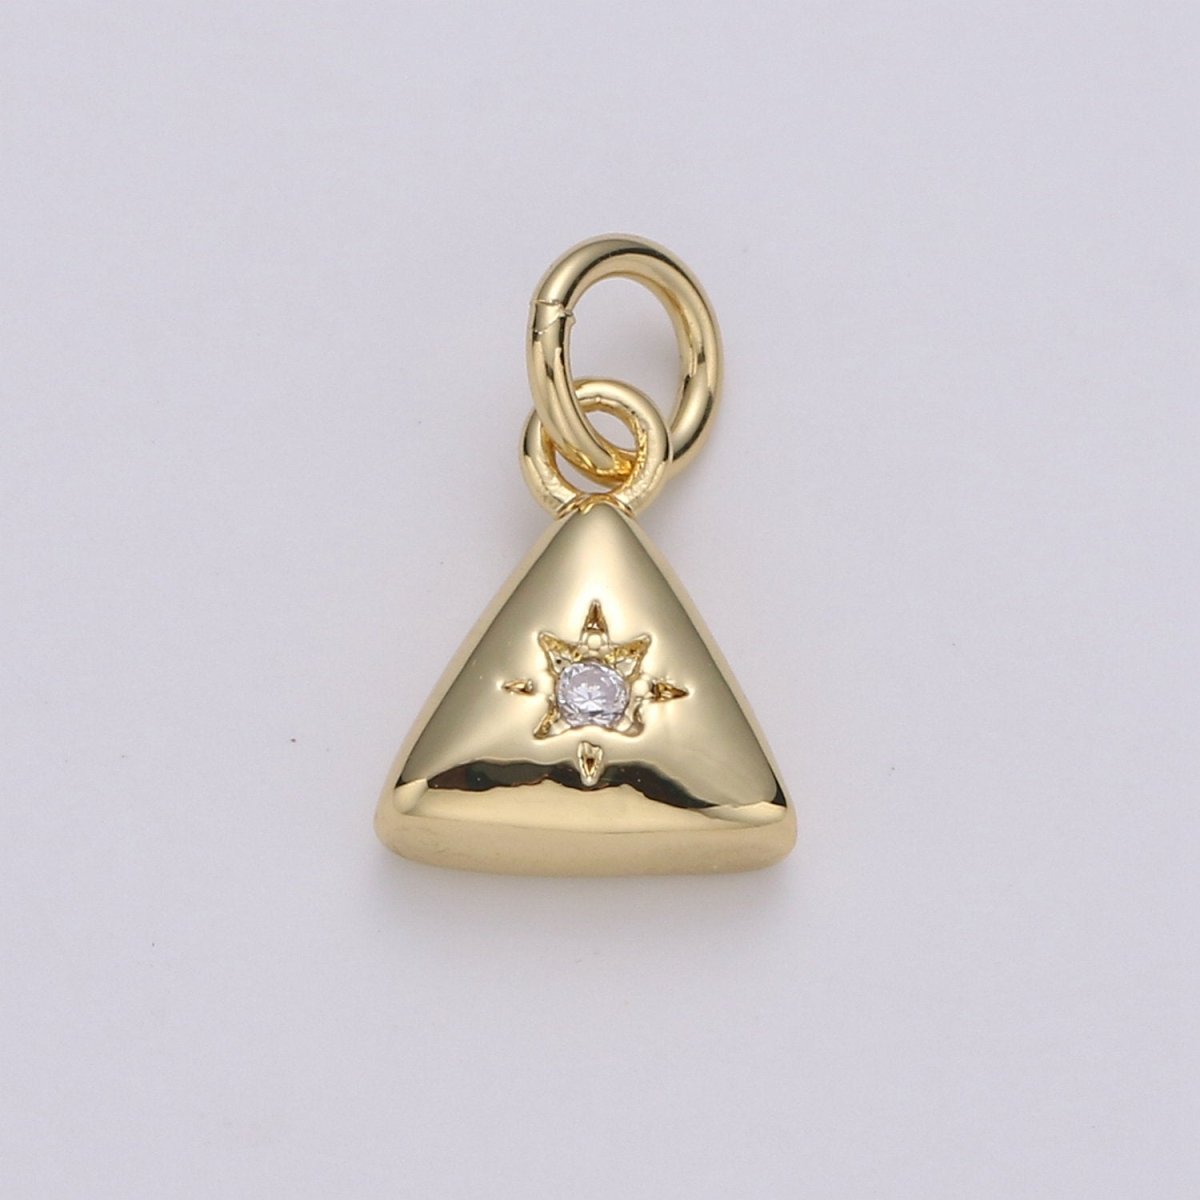 Dainty 14k Gold Filled North Star Charm Cubic Zirconia Triangle Pendant in Gold micro Pave CZ North Star Pendant Jewelry Making, D-421 D-422 - DLUXCA